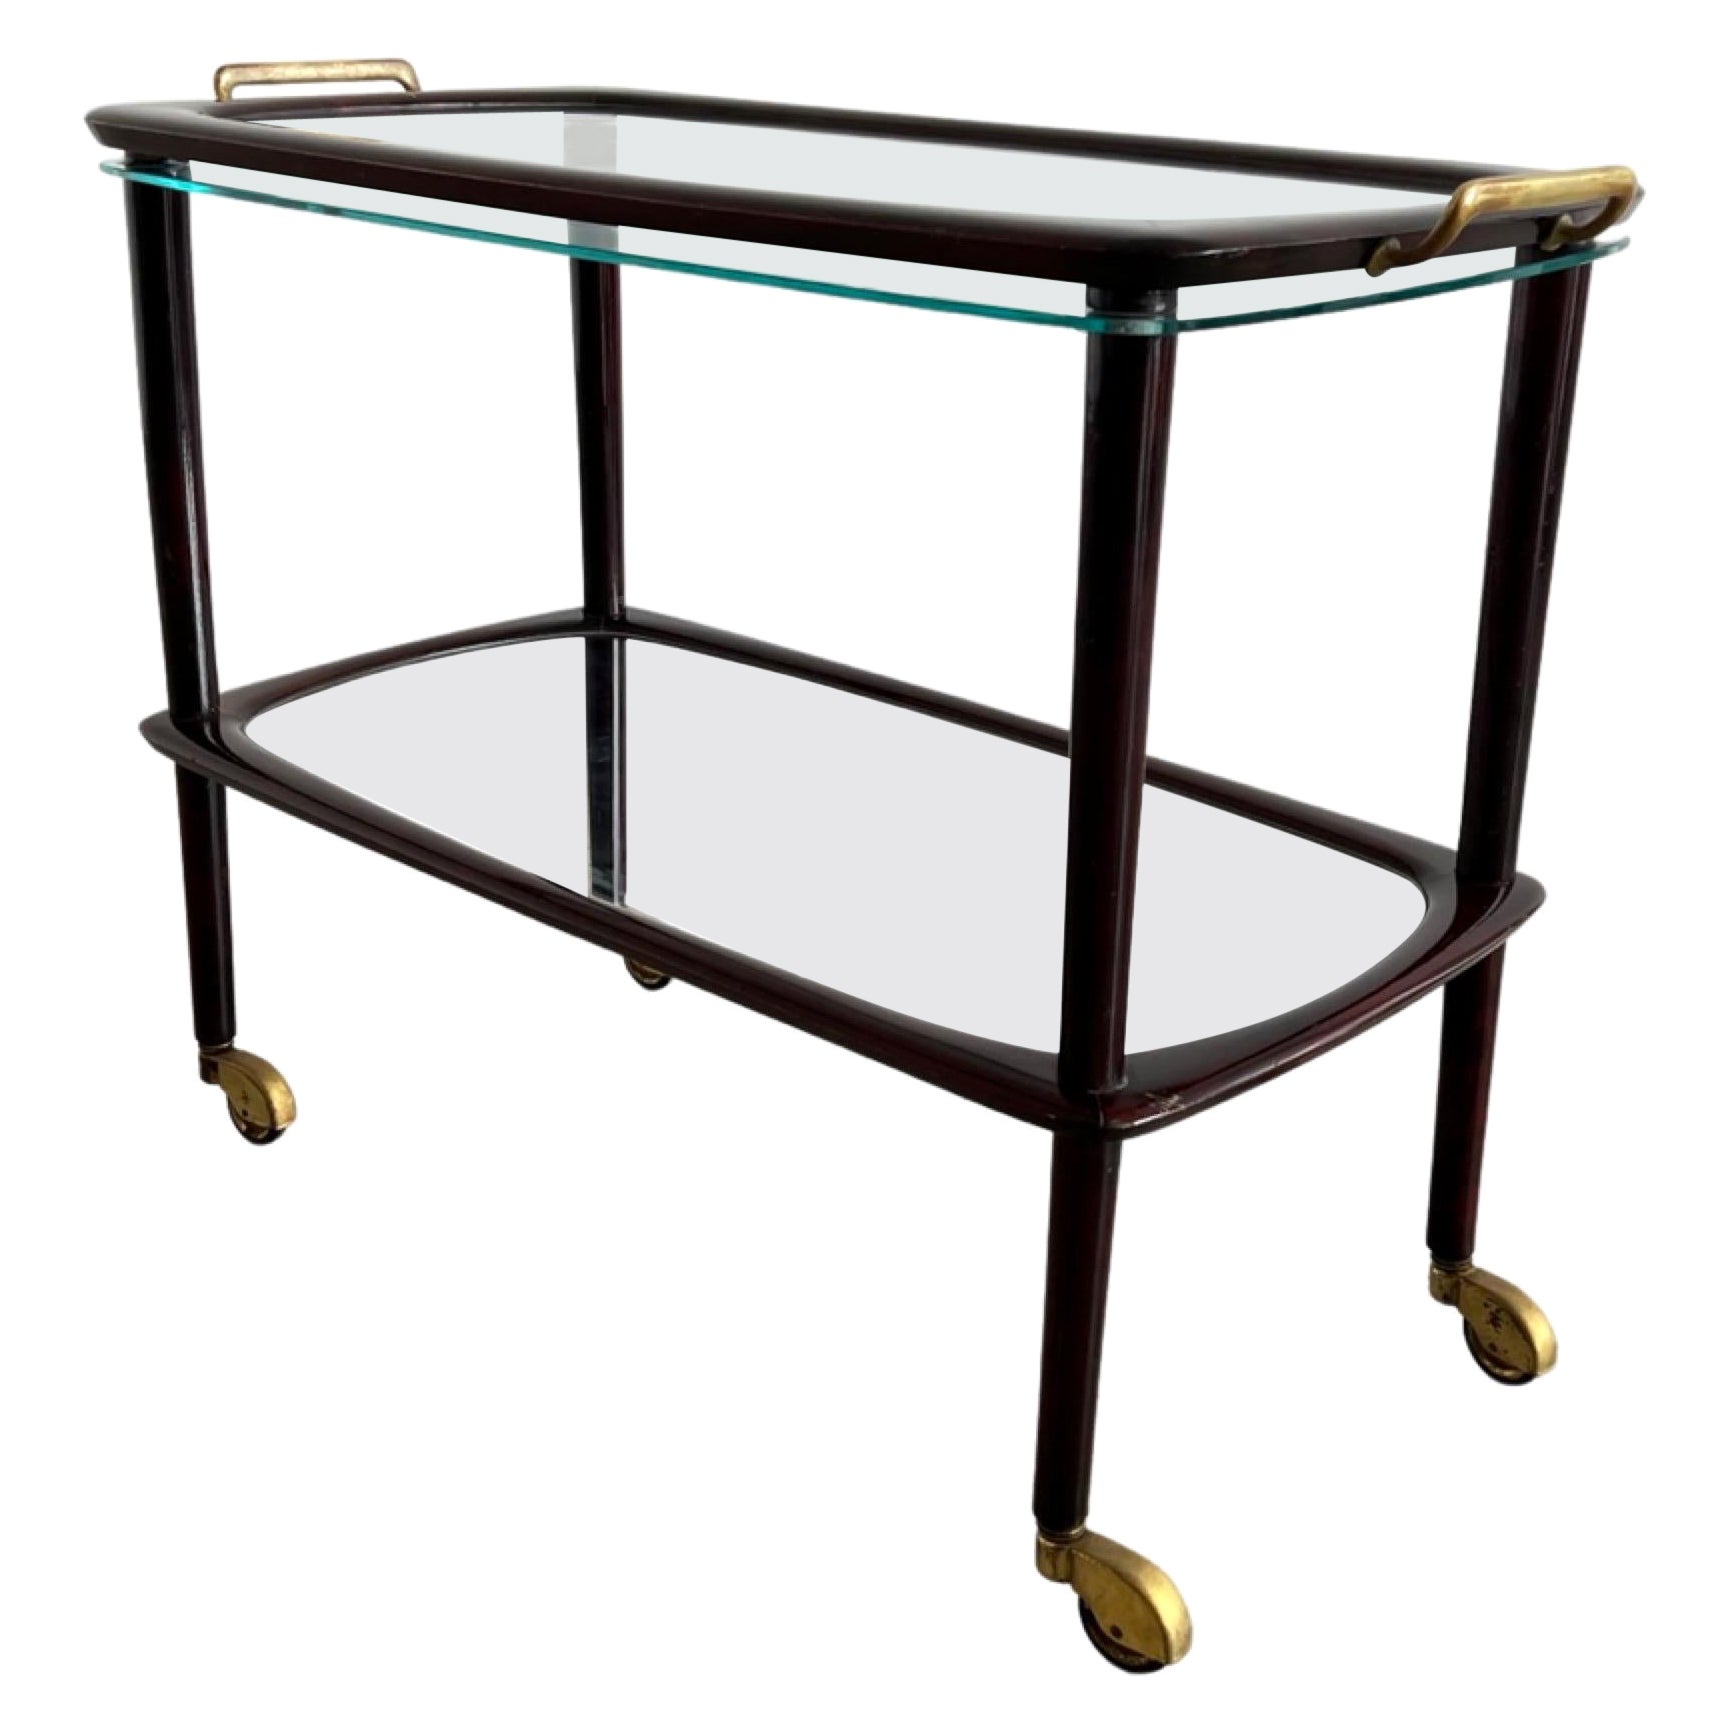 Italian Bar Cart by Cesare Lace for Fratelli Reguitti 1950s For Sale